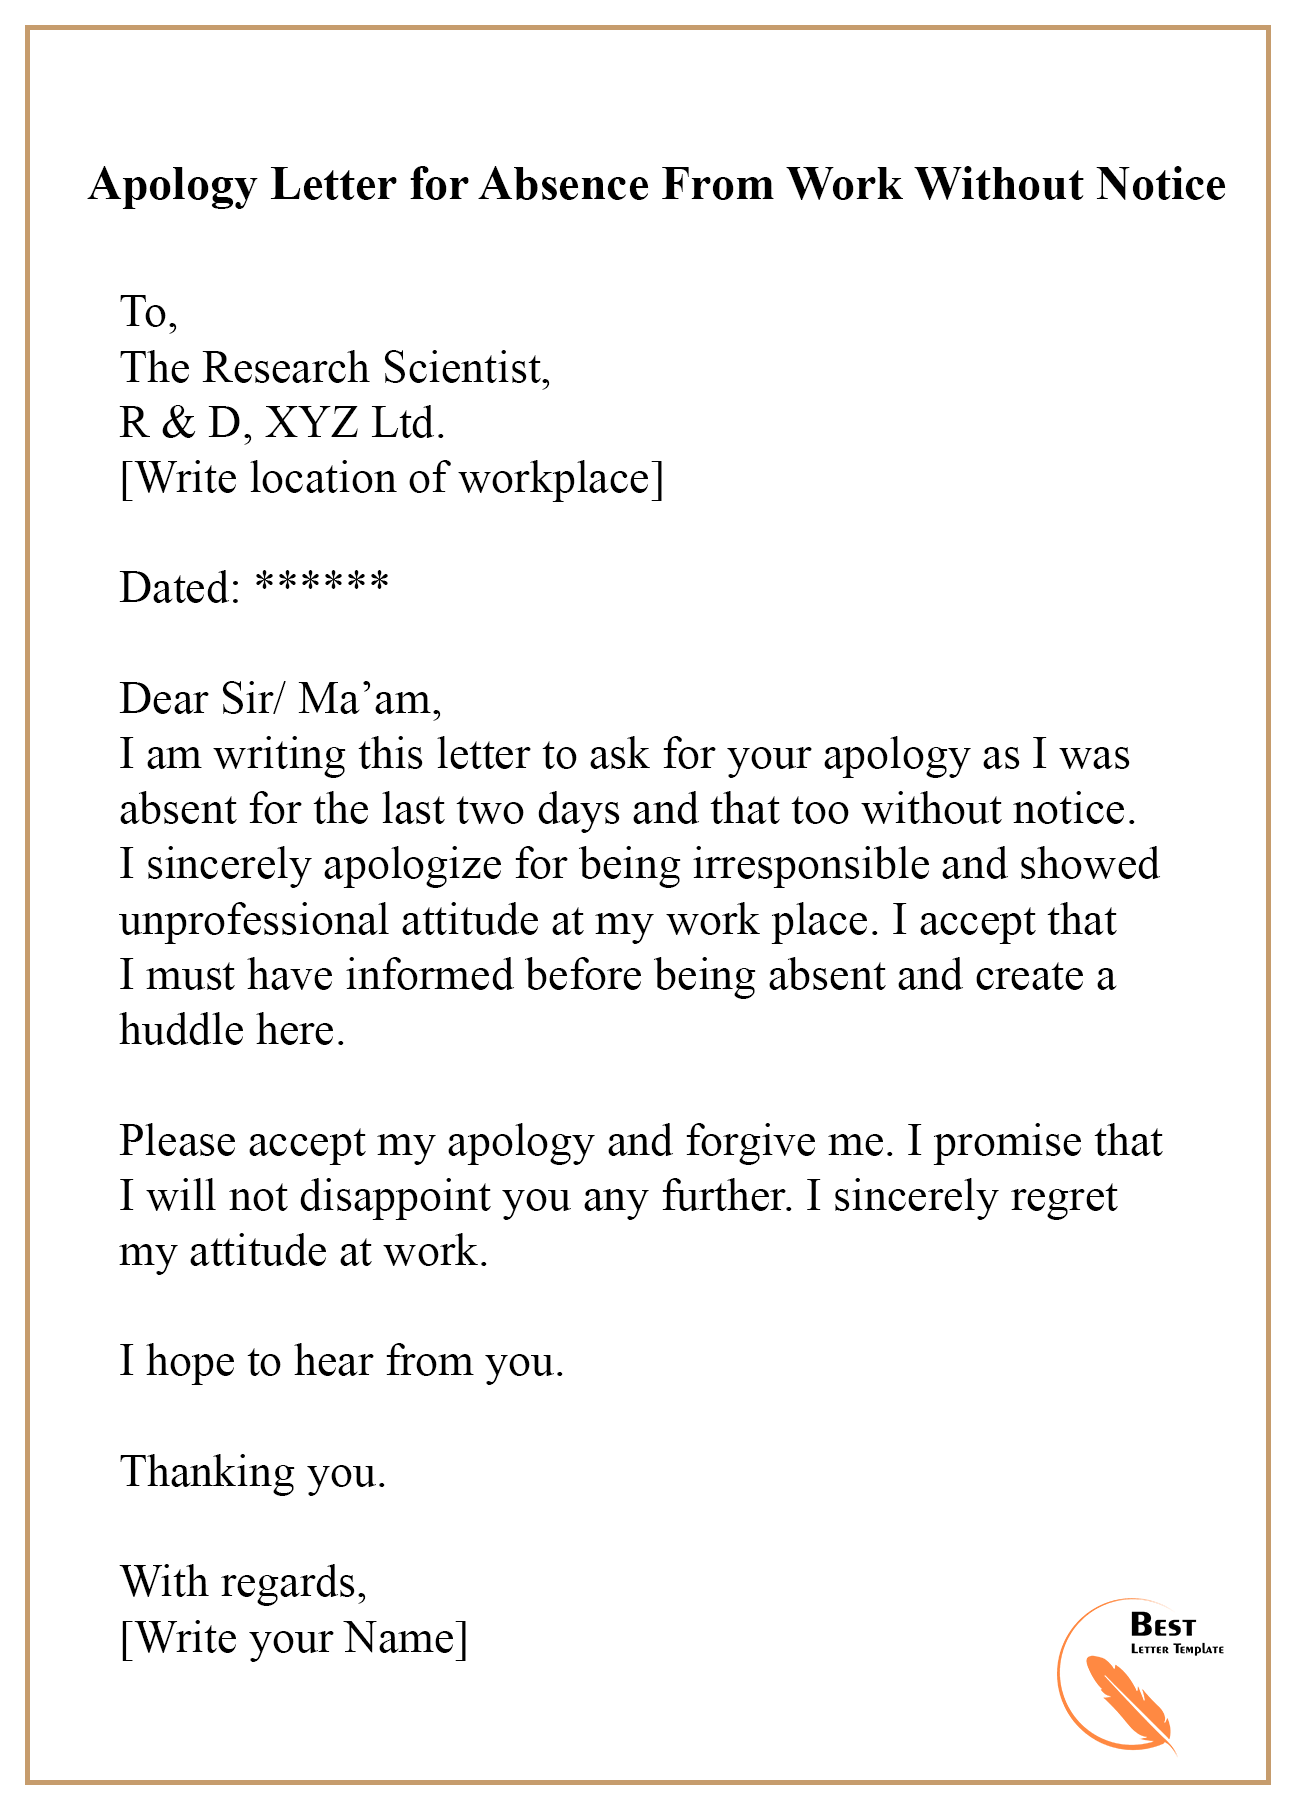 Apology Letter For Absence From Work Without Notice 